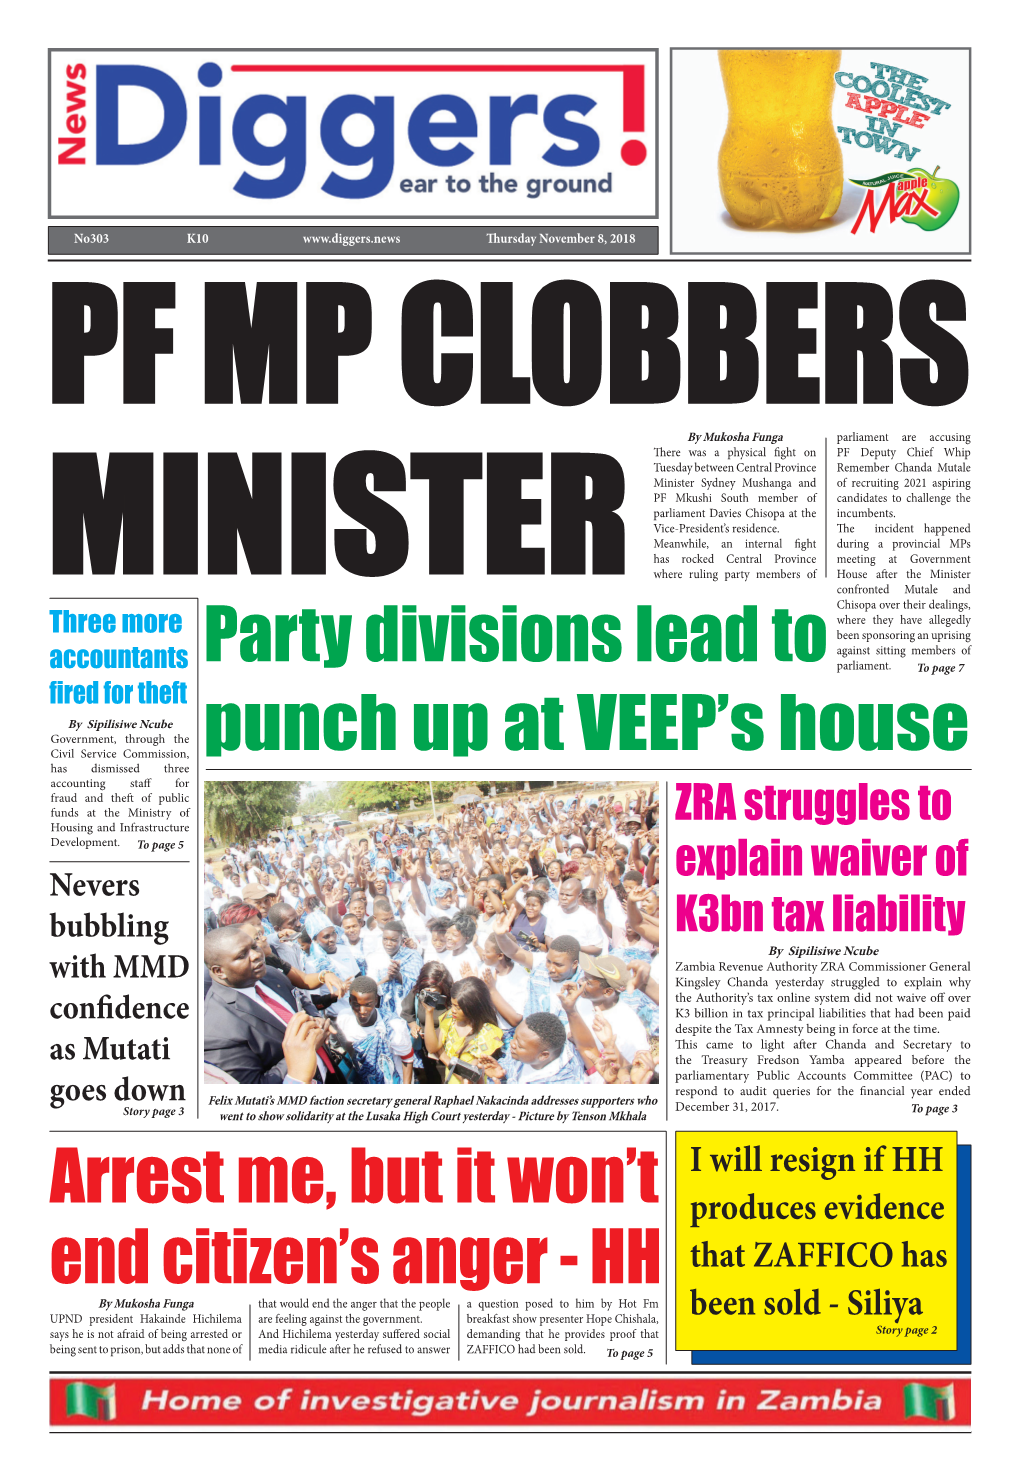 Party Divisions Lead to Punch up at VEEP's House